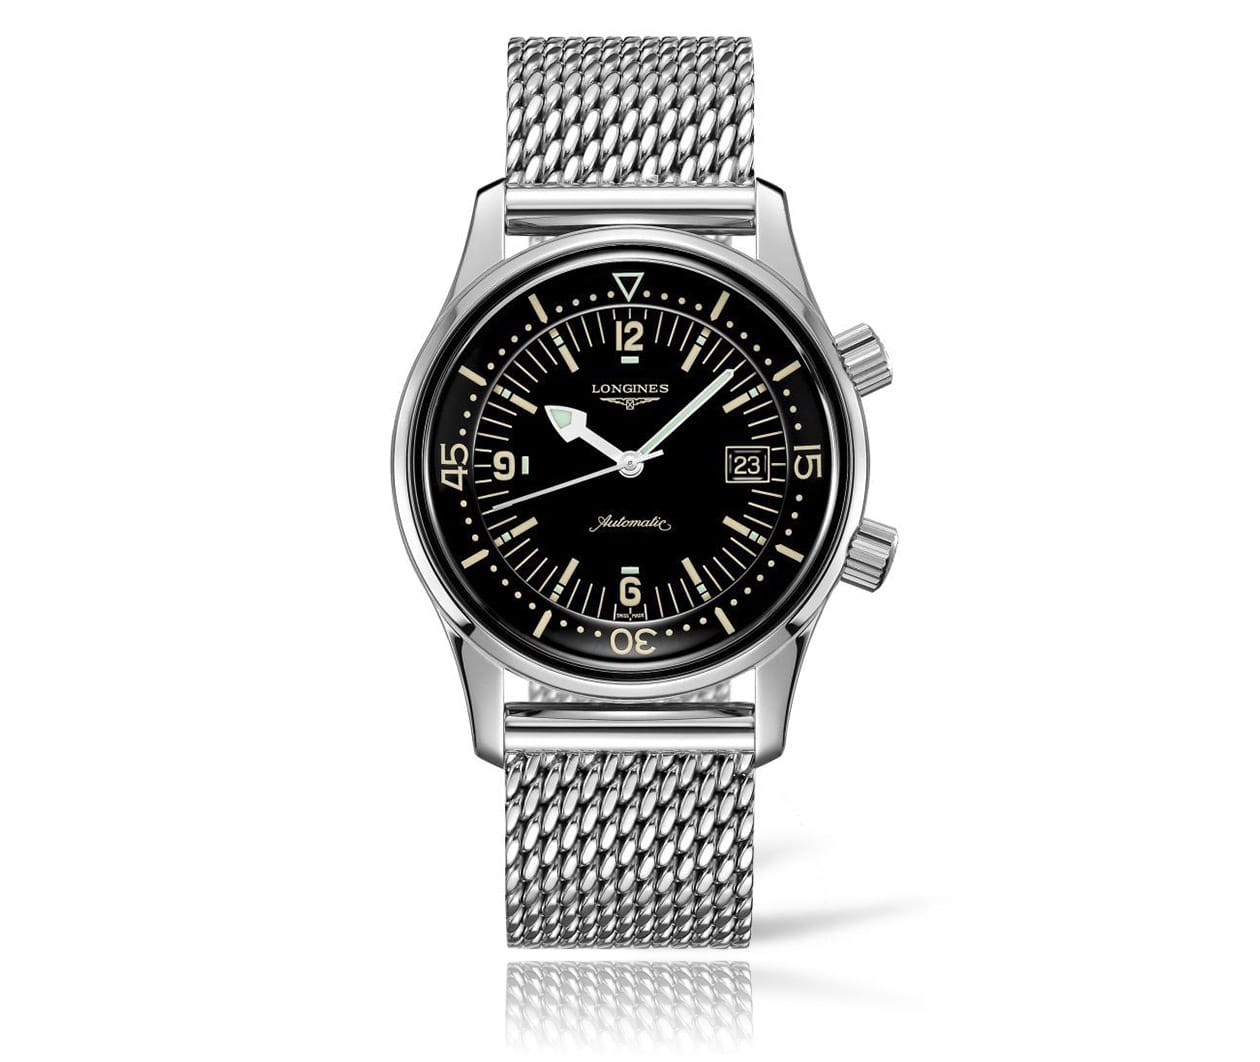 LONGINES THE LONGINES LEGEND DIVER WATCH THE LONGINES LEGEND DIVER WATCH L37744506 flatlay